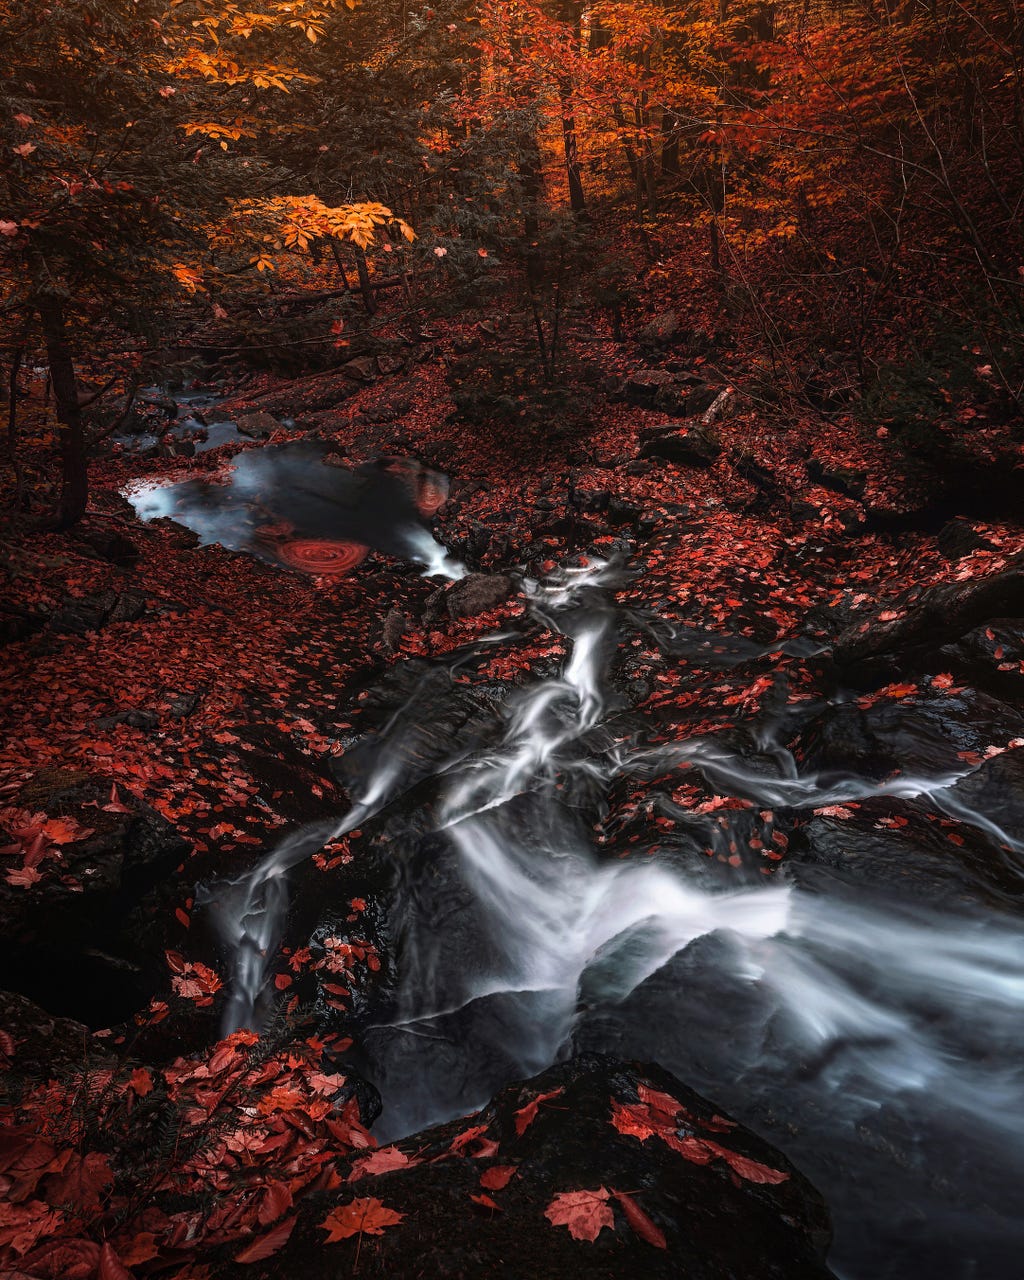 A forest scene during fall with a stream through the piles of fallen leaves